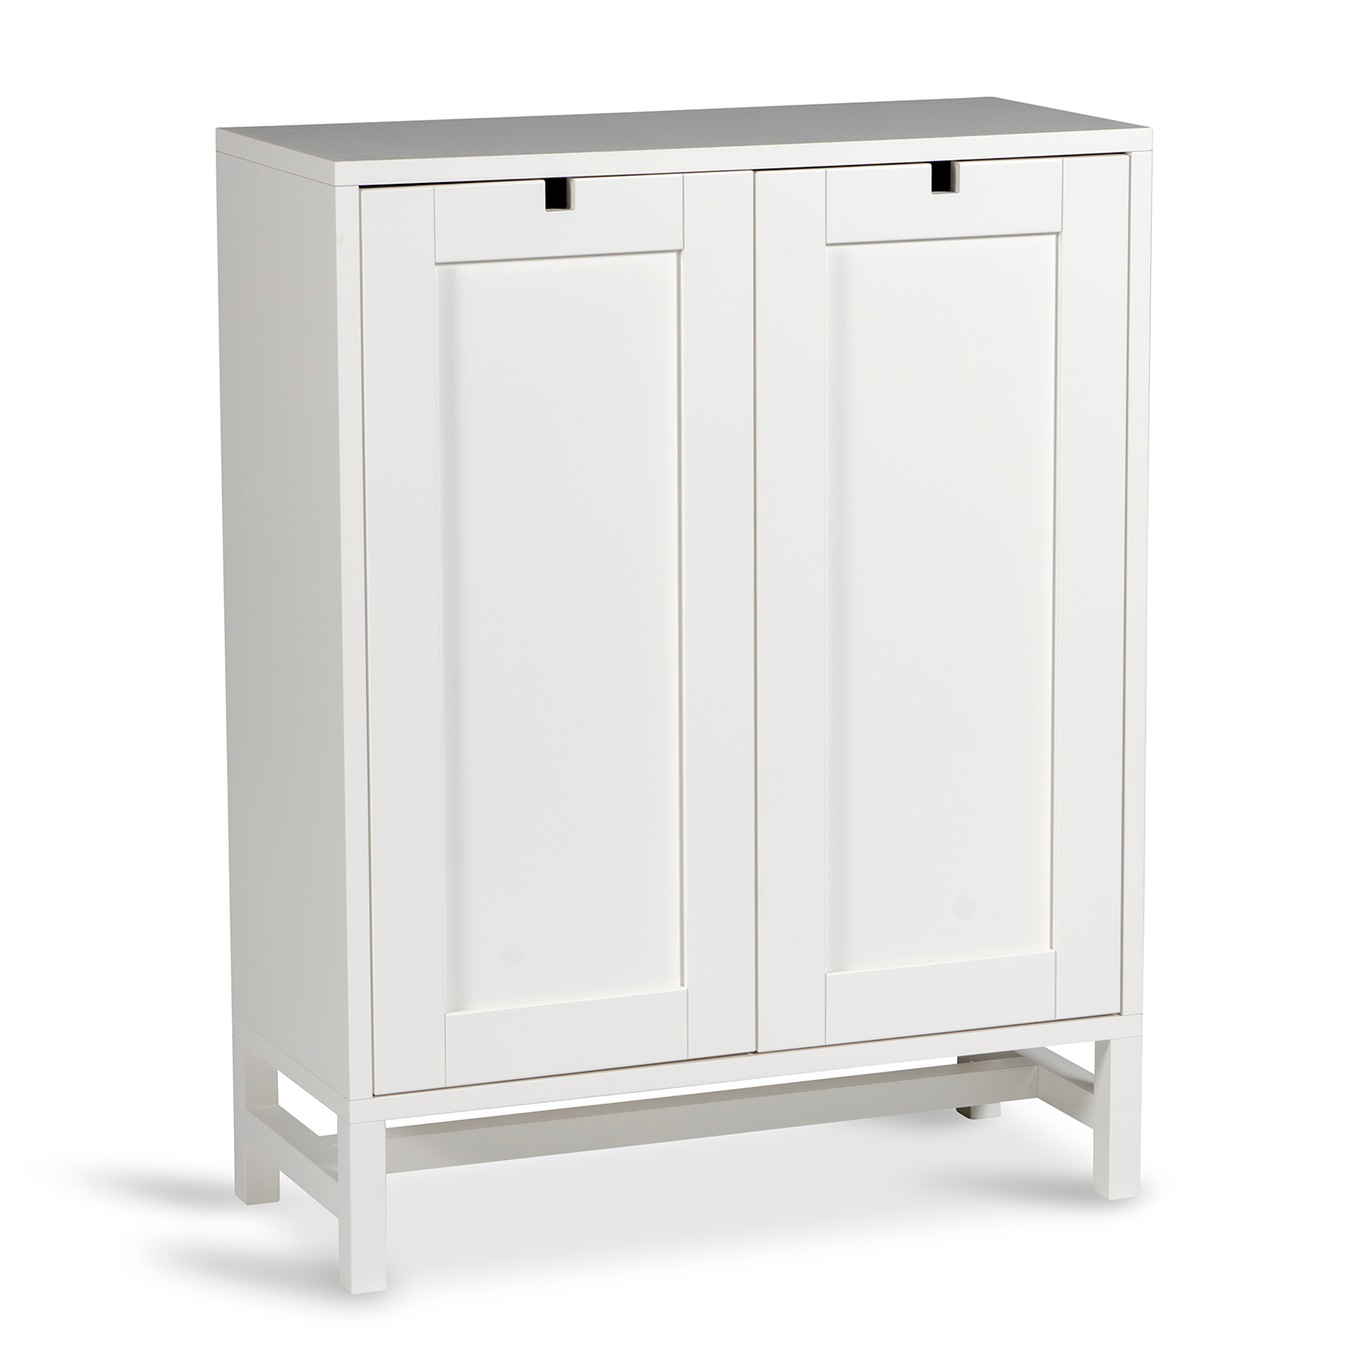 Falsterbo Cabinet Covered Doors 90 cm, White Lacquer